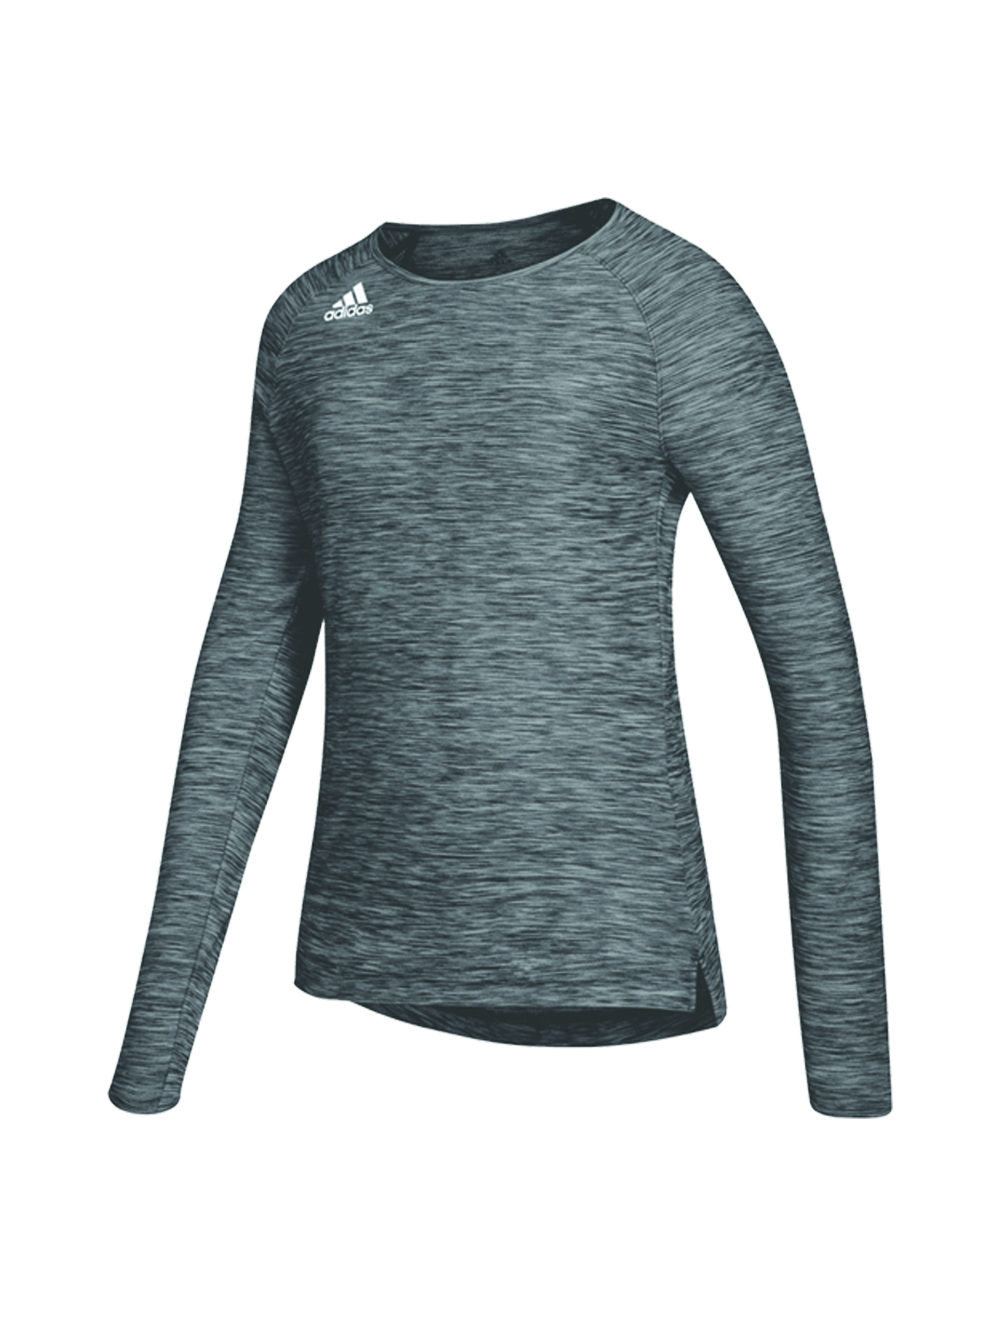 Adidas Hi-Lo Long Sleeve Jersey | Midwest Volleyball Warehouse